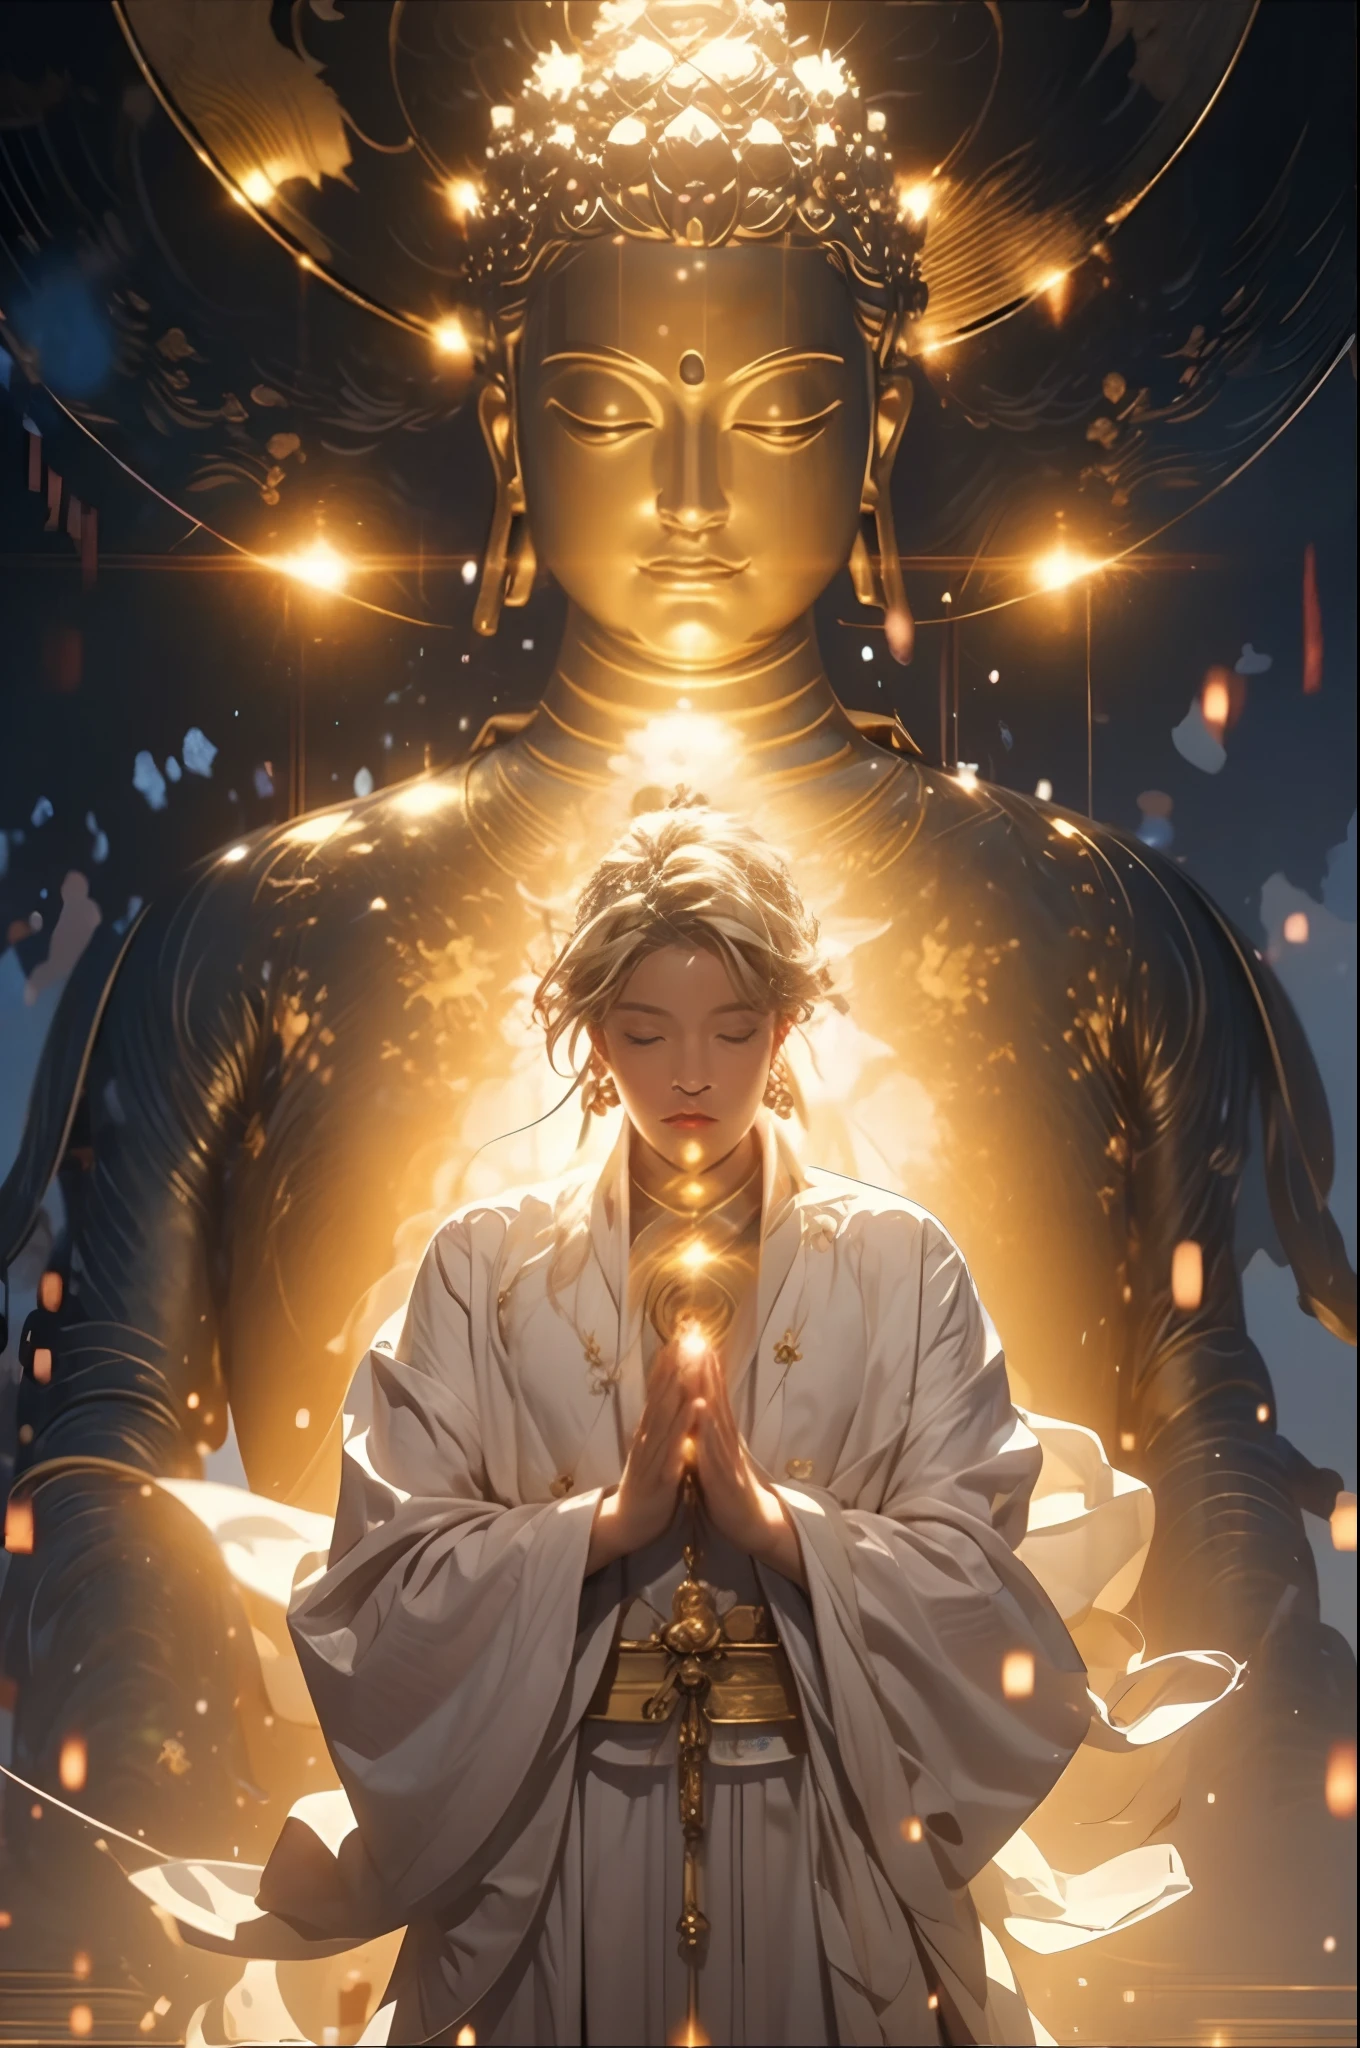 (masterpiece:1.2),best quality,PIXIV,taoist,(meditation:1.1),
solo,a character standing in front of blonde glowing buddha,transparent,realistic,skin textures